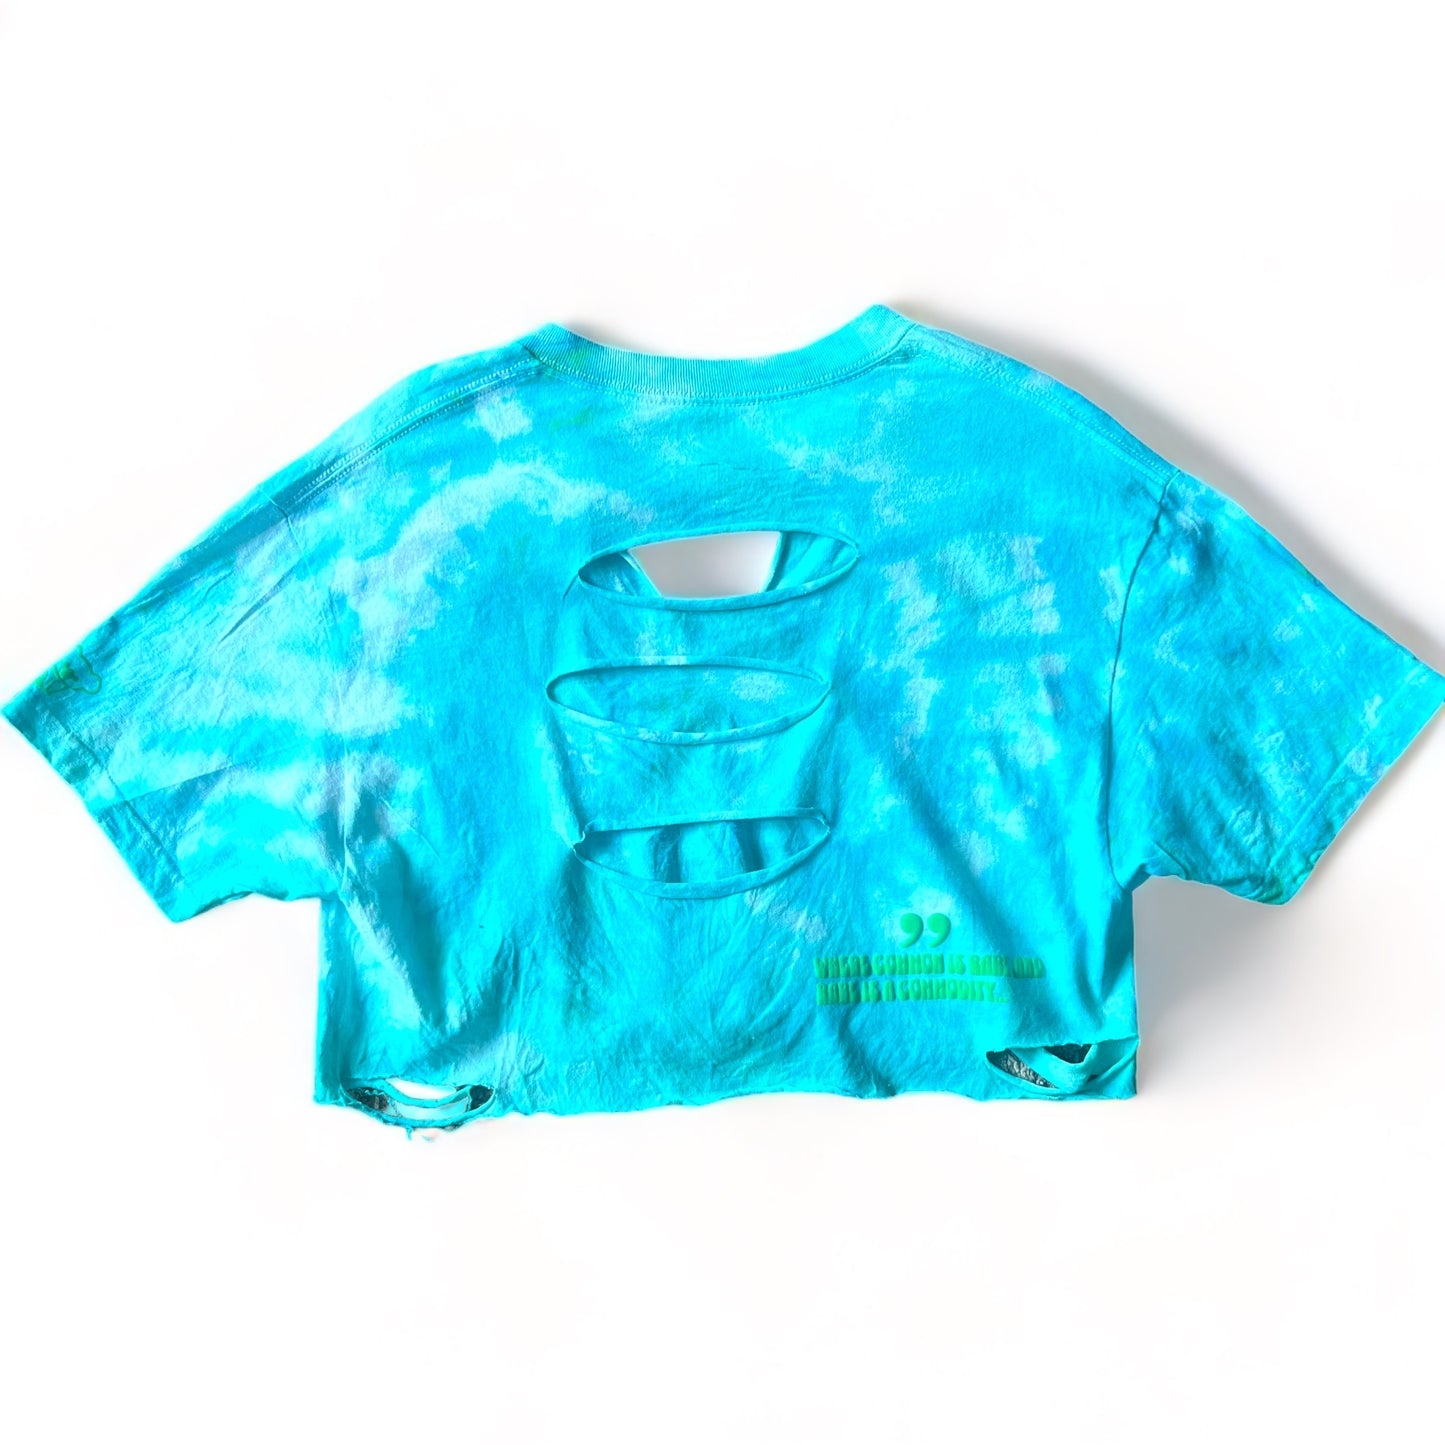 ODCO Crop Top Every Blue/neon green